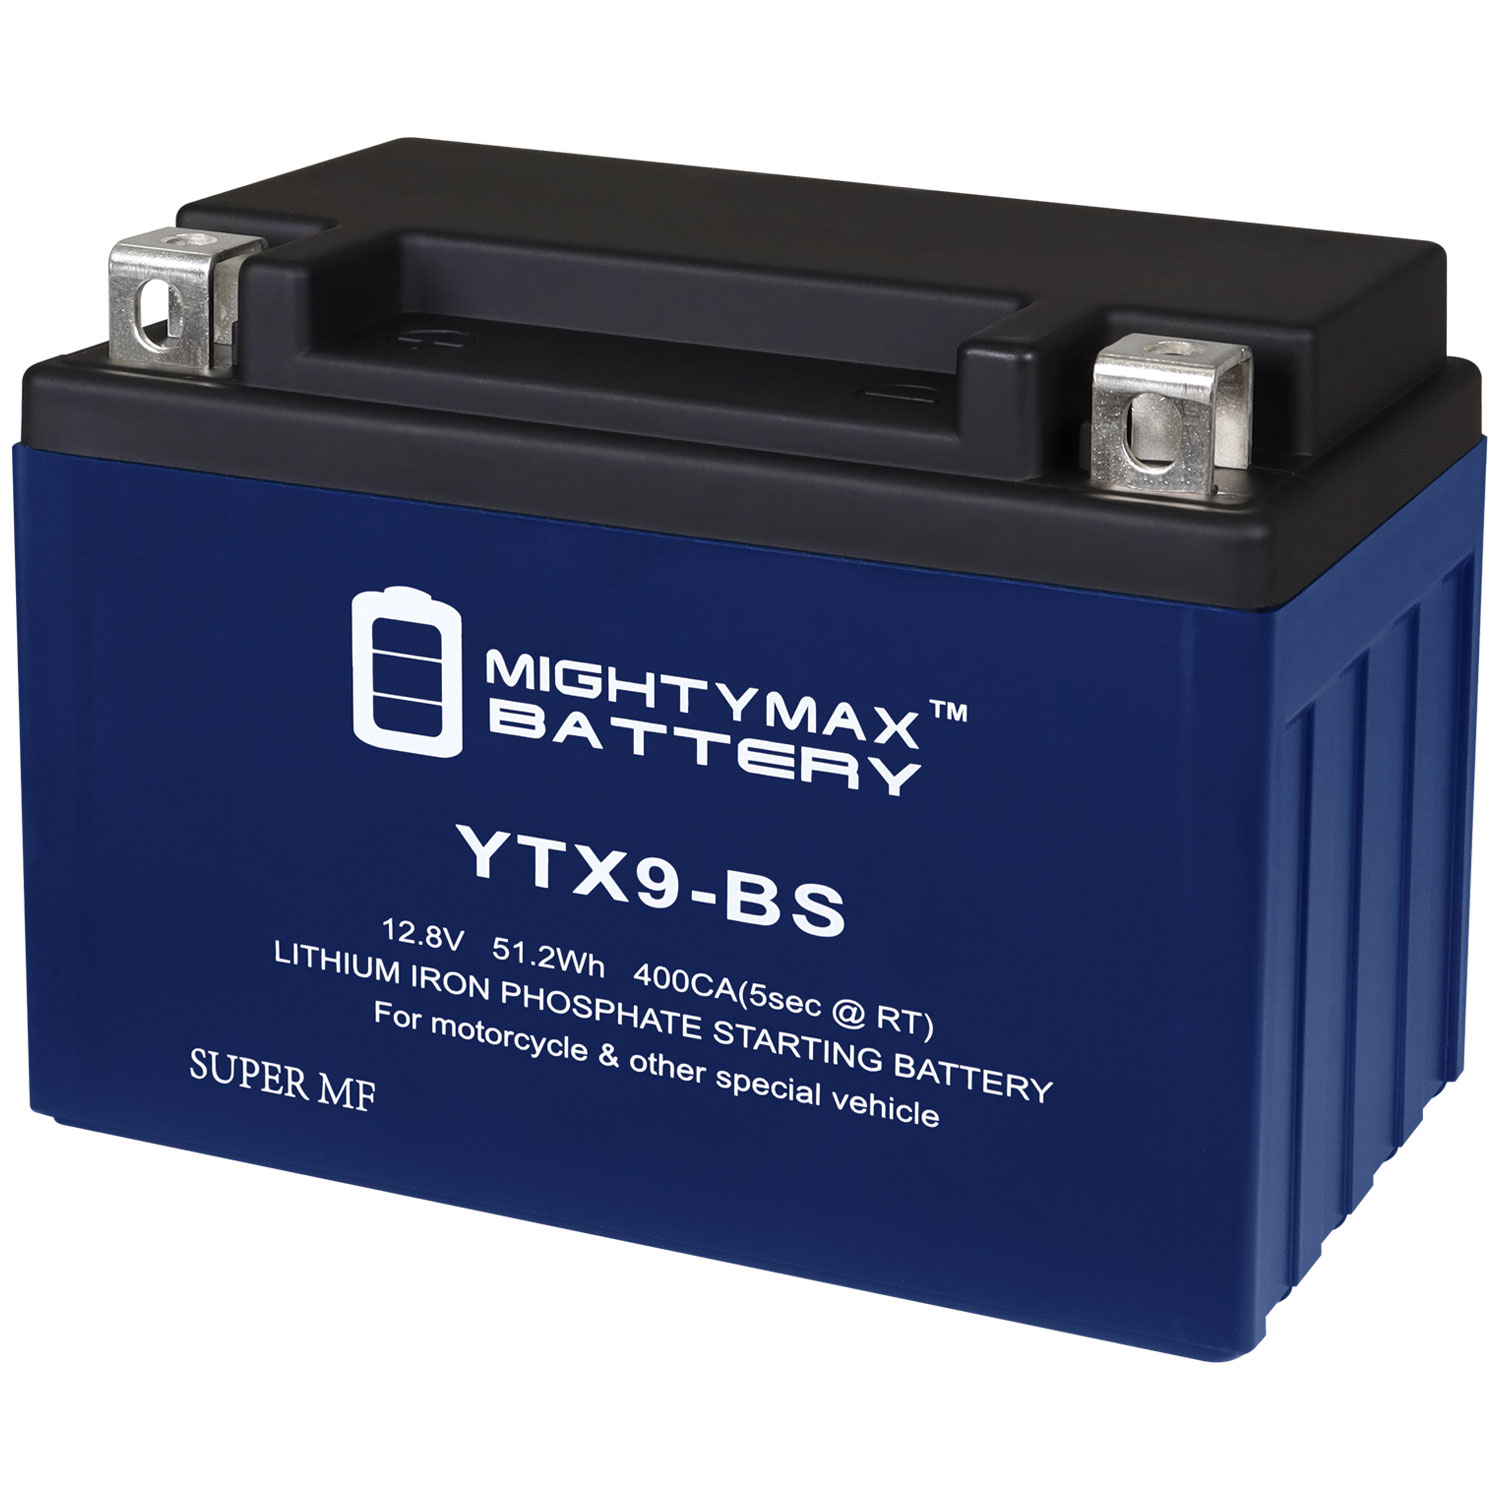 Ytx9-bs Lithium Battery Replacement for Everstart ES9BS Powersport